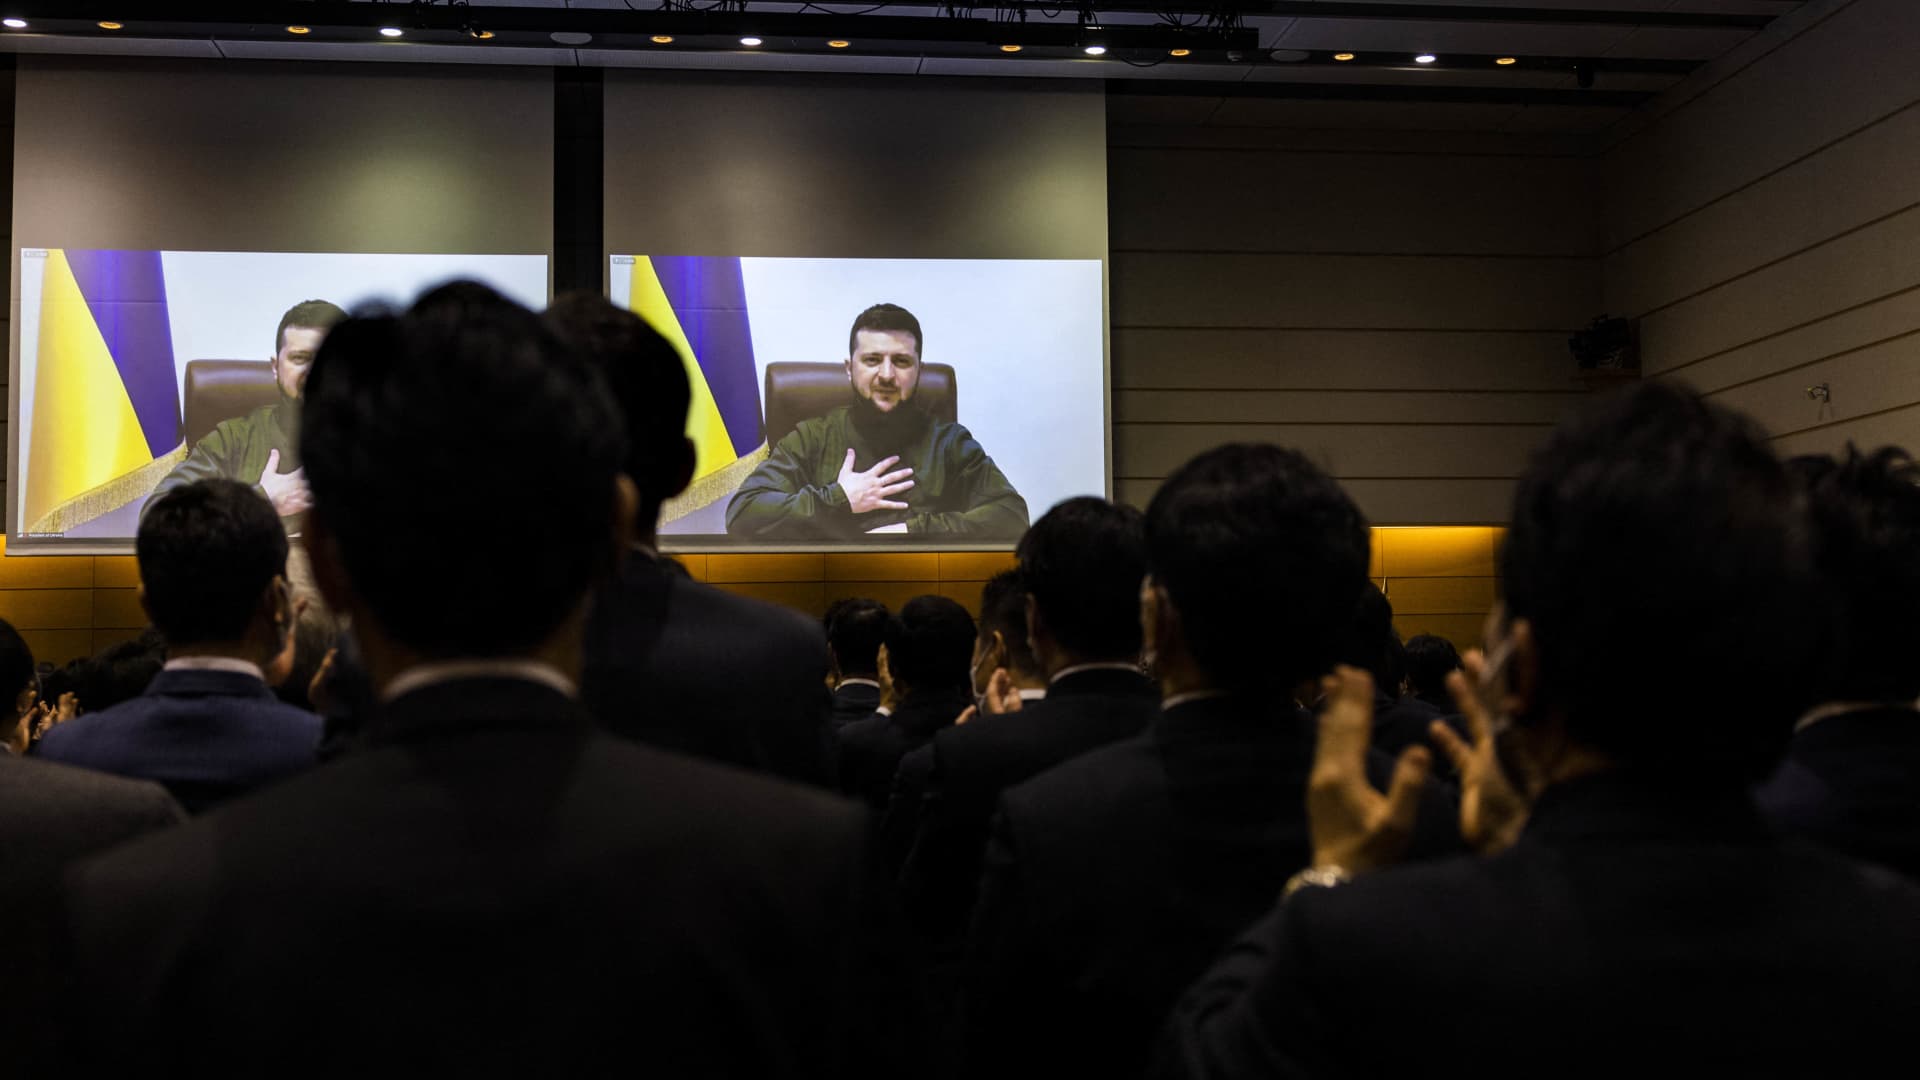 Members of Japan's lower house of parliament applaud as Ukrainian President Volodymyr Zelensky appears on screen via video link at the House of Representatives office building in Tokyo on March 23, 2022.